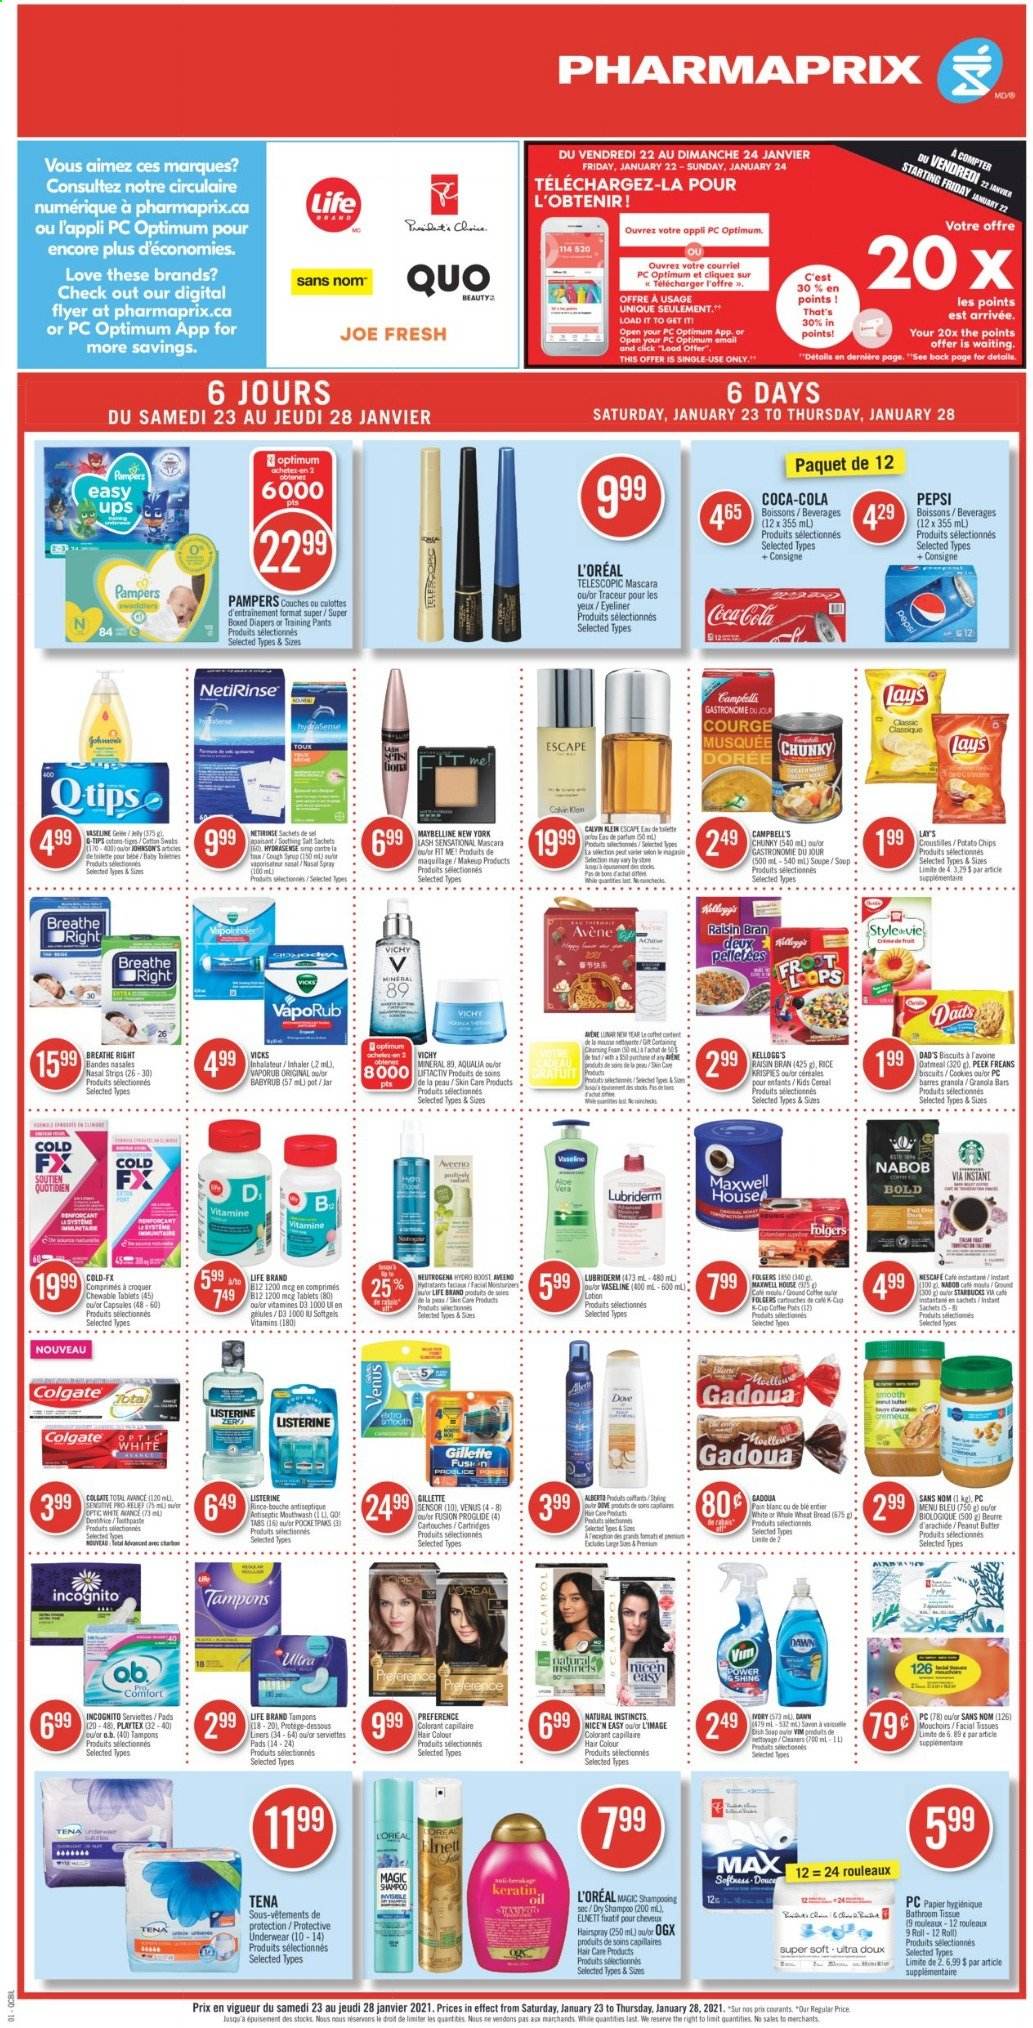 thumbnail - Pharmaprix Flyer - January 23, 2021 - January 28, 2021 - Sales products - wheat bread, soup, cookies, Kellogg's, biscuit, potato chips, Lay’s, oatmeal, cereals, granola bar, Raisin Bran, rice, oil, peanut butter, syrup, Coca-Cola, Pepsi, Boost, Folgers, coffee capsules, K-Cups, Grant's, pants, nappies, Johnson's, baby pants, Aveeno, bath tissue, Vichy, Vaseline, soap, mouthwash, Playtex, tampons, facial tissues, L’Oréal, OGX, hair color, keratin, body lotion, Lubriderm, Venus, Vicks, eyeliner, pot, jar, VapoRub, vitamin D3, nasal spray, Gillette, Listerine, mascara, Maybelline, Neutrogena, shampoo, Pampers, chips, Nescafé. Page 1.